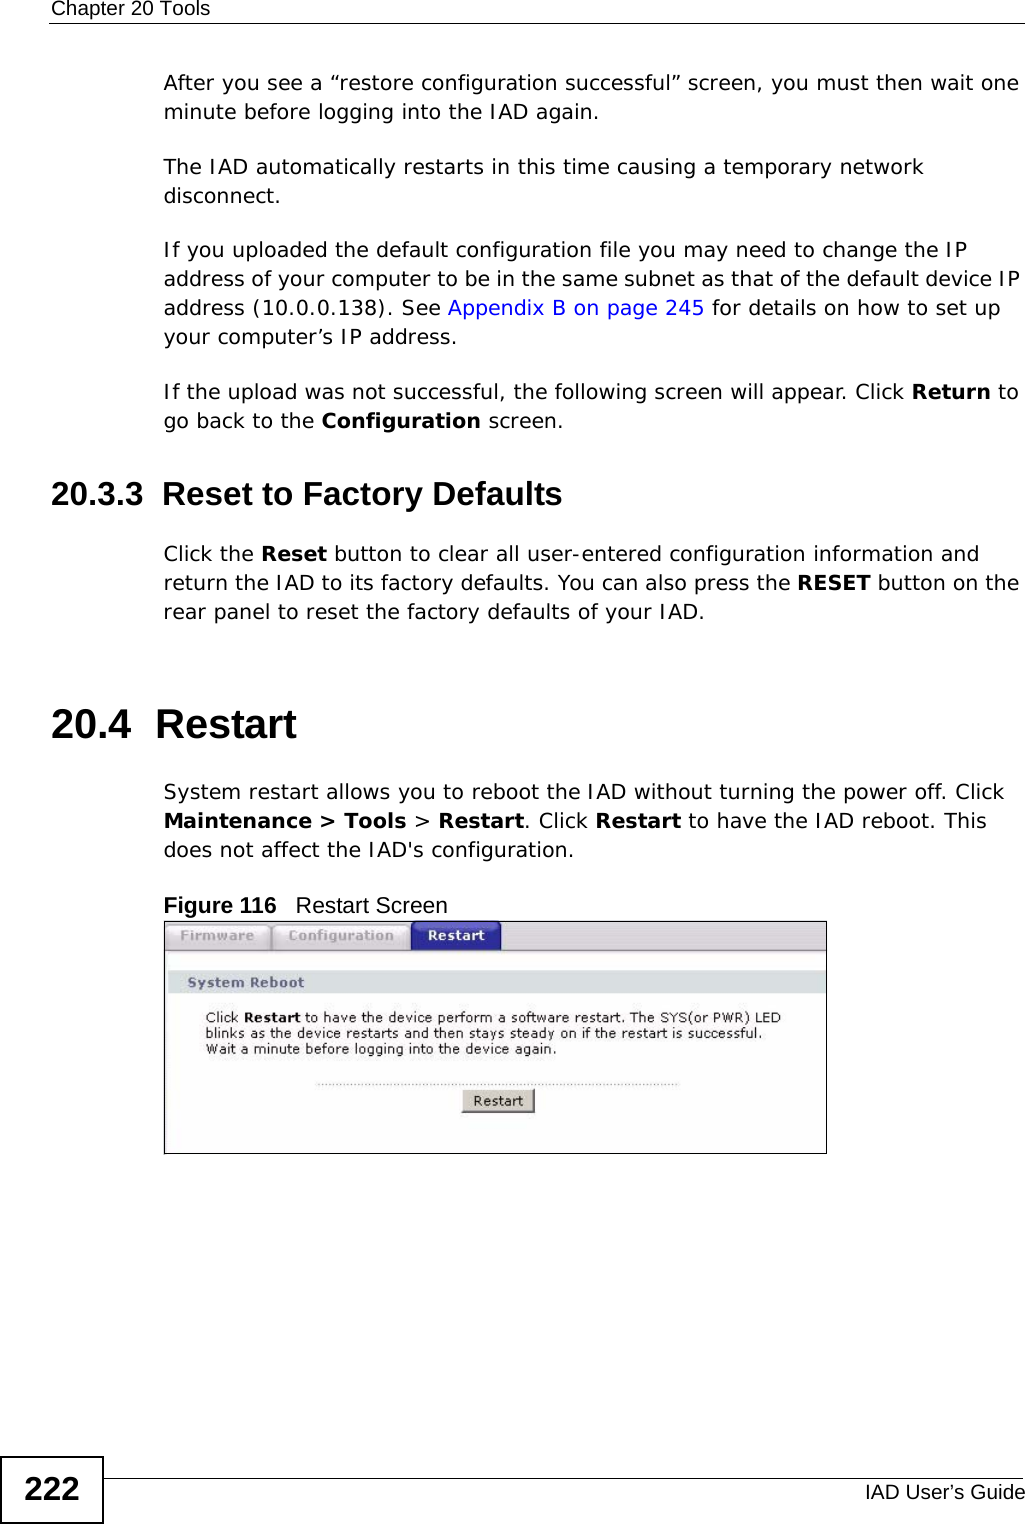 Chapter 20 ToolsIAD User’s Guide222After you see a “restore configuration successful” screen, you must then wait one minute before logging into the IAD again. The IAD automatically restarts in this time causing a temporary network disconnect. If you uploaded the default configuration file you may need to change the IP address of your computer to be in the same subnet as that of the default device IP address (10.0.0.138). See Appendix B on page 245 for details on how to set up your computer’s IP address.If the upload was not successful, the following screen will appear. Click Return to go back to the Configuration screen. 20.3.3  Reset to Factory Defaults  Click the Reset button to clear all user-entered configuration information and return the IAD to its factory defaults. You can also press the RESET button on the rear panel to reset the factory defaults of your IAD.20.4  Restart System restart allows you to reboot the IAD without turning the power off. Click Maintenance &gt; Tools &gt; Restart. Click Restart to have the IAD reboot. This does not affect the IAD&apos;s configuration. Figure 116   Restart Screen